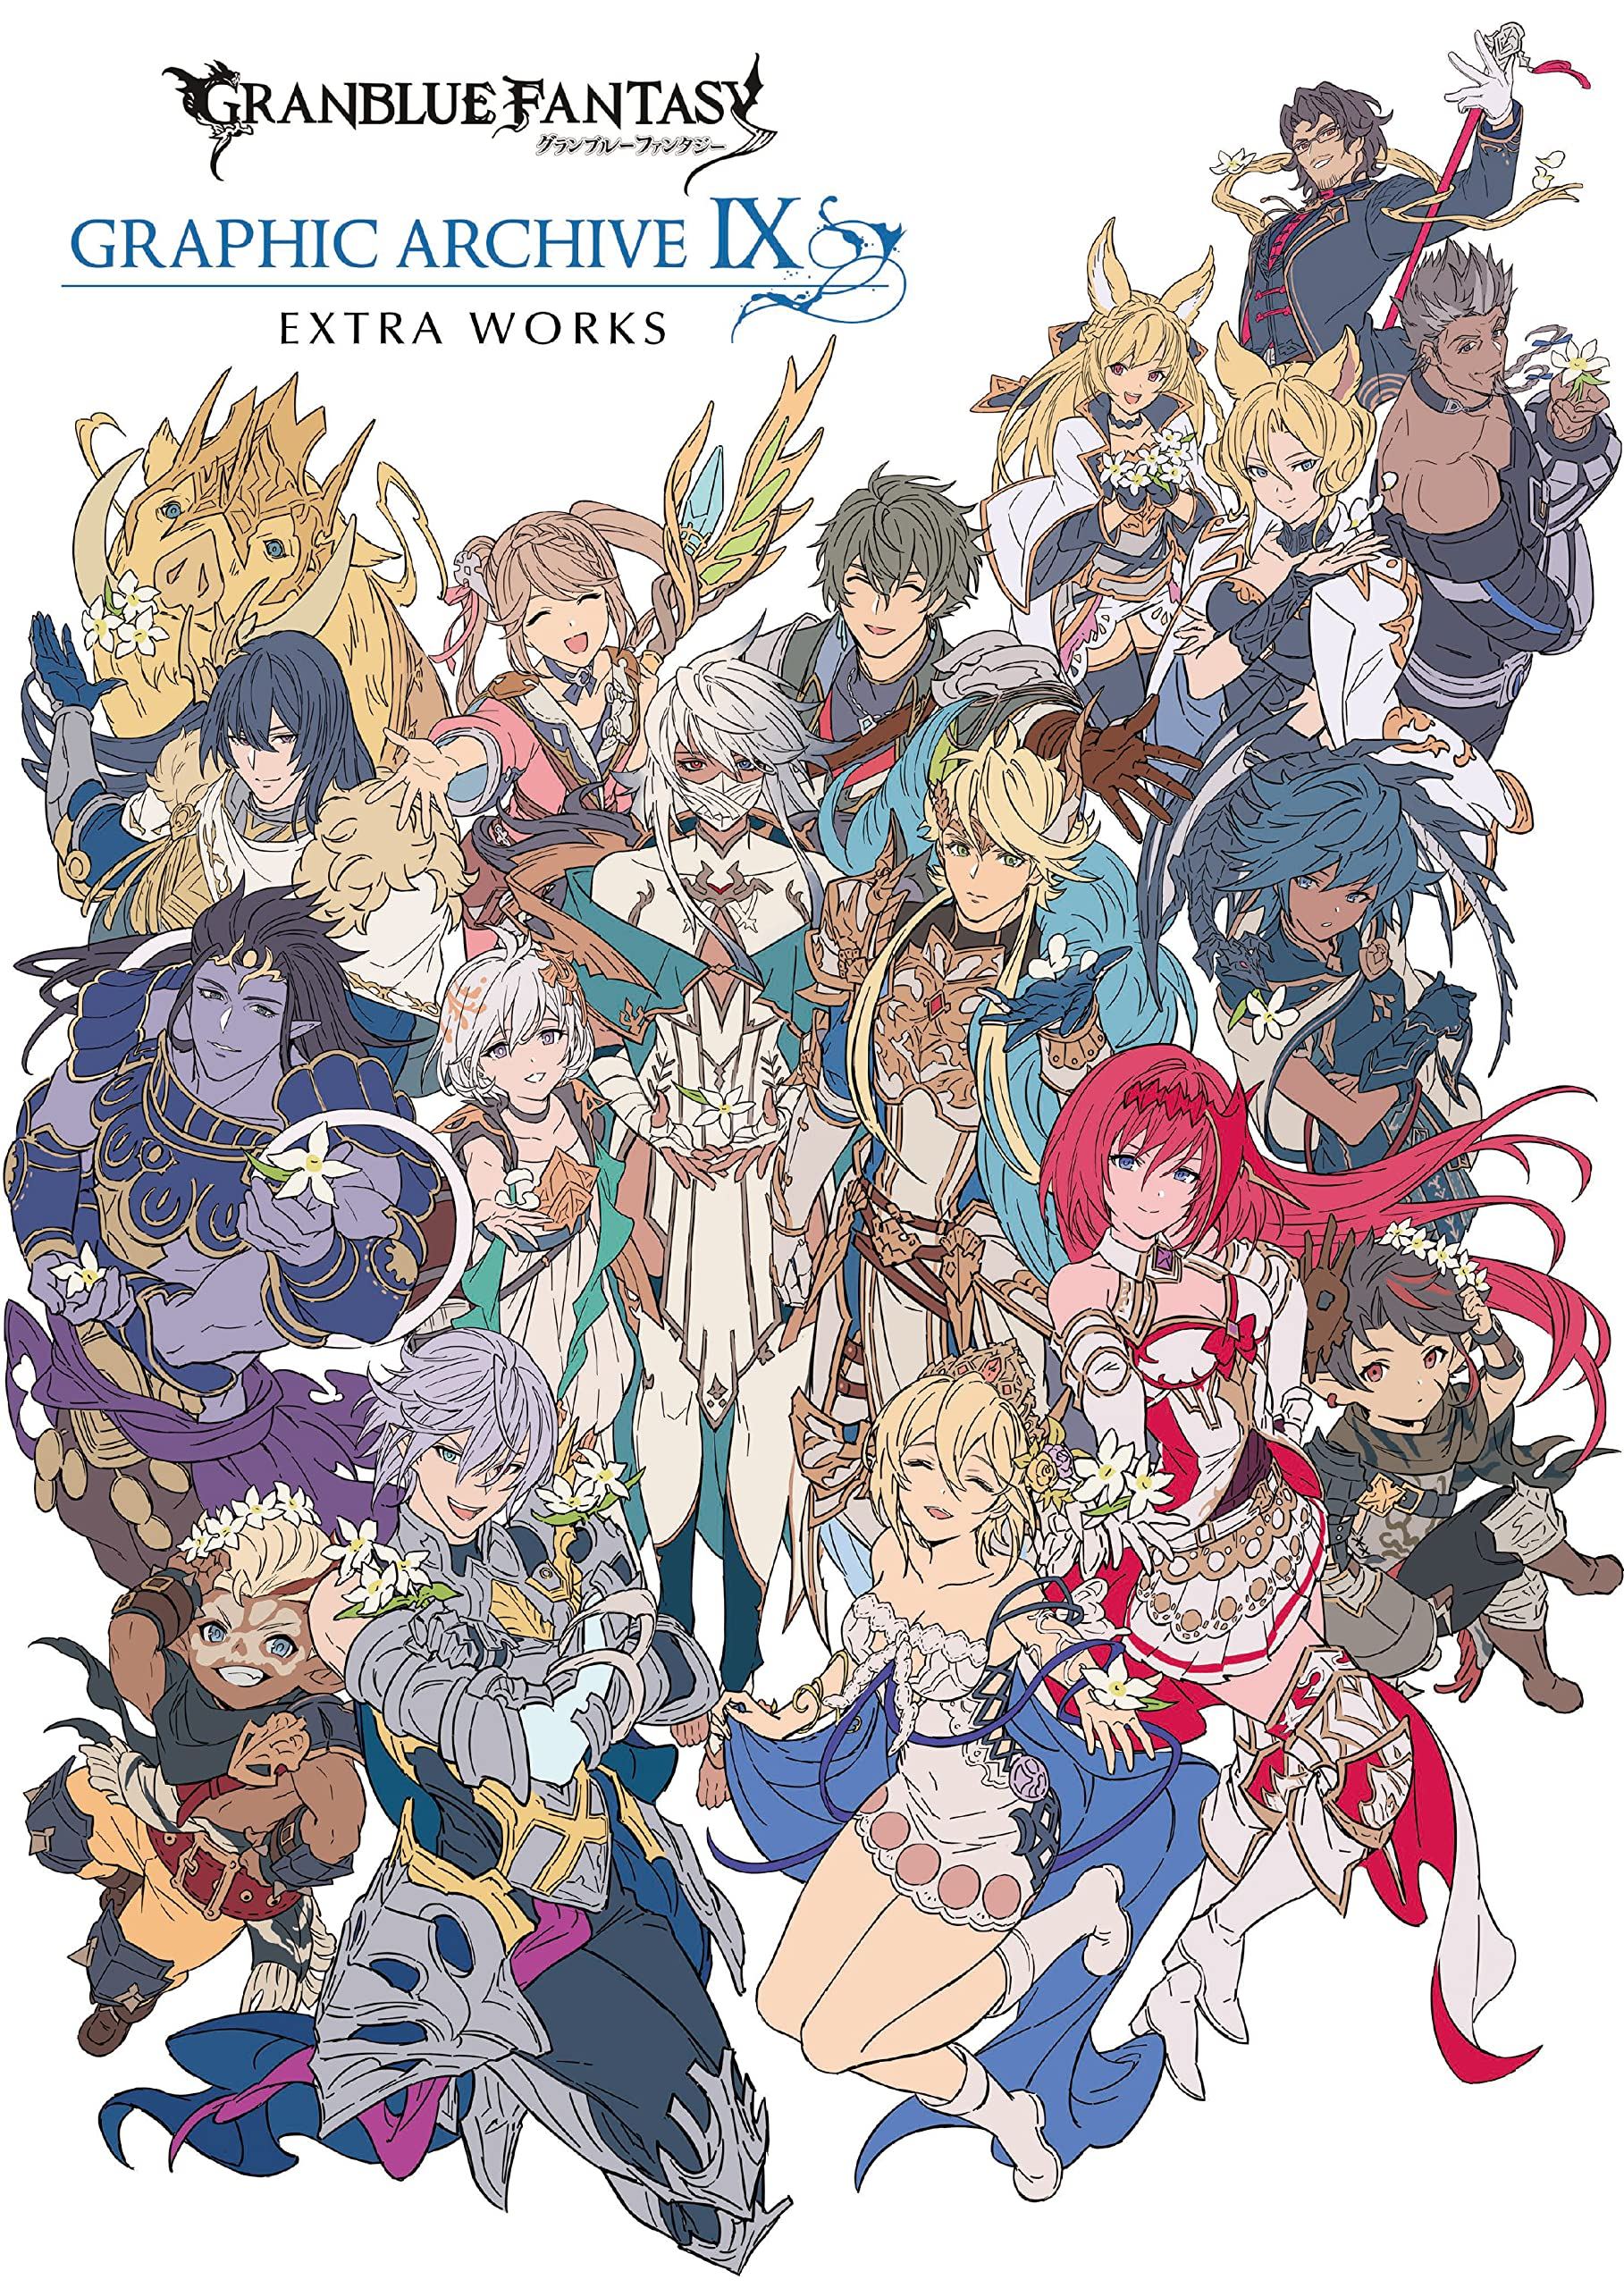 Granblue Fantasy: The Animation Official USA Website